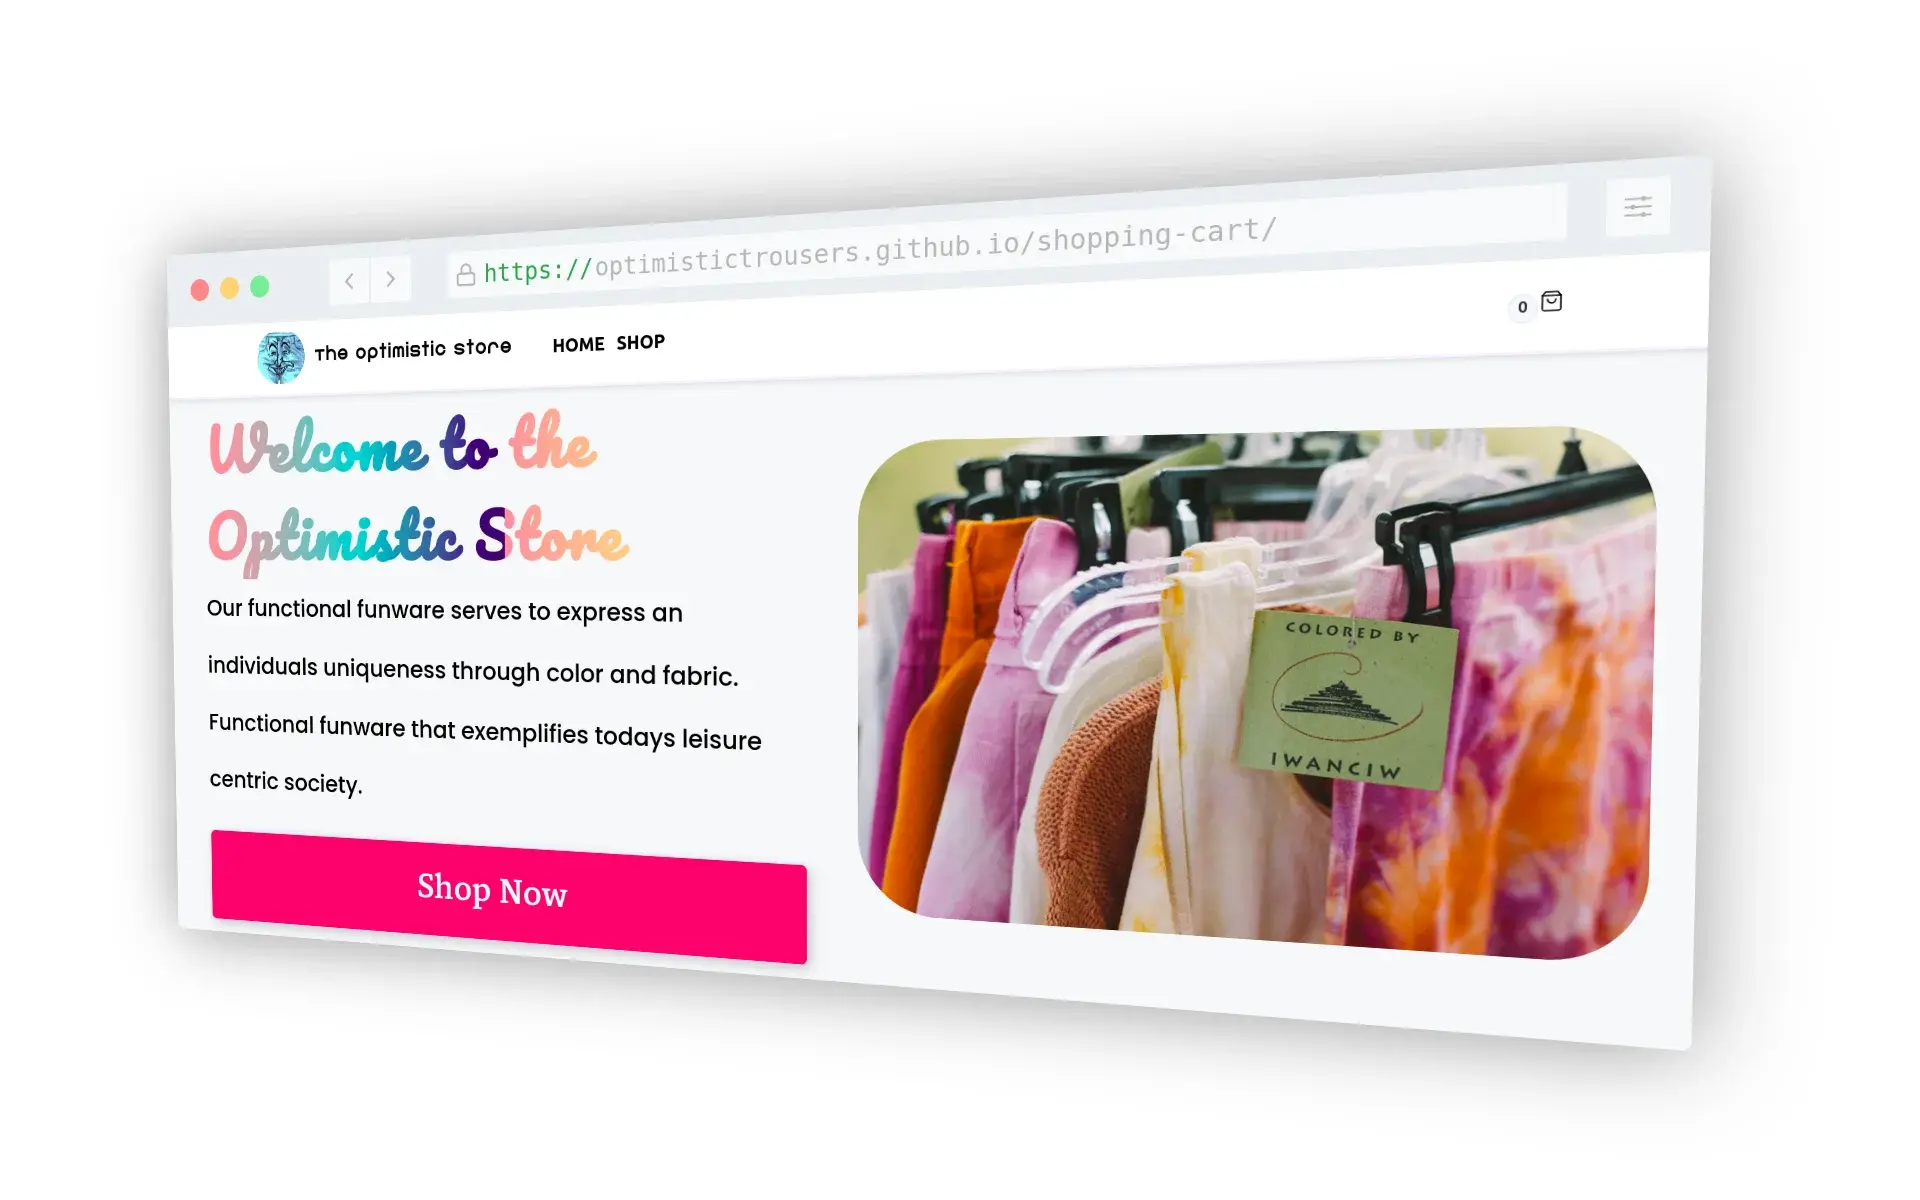 Website homepage of 'The Optimistic Store' with colorful clothing on display and a 'Shop Now' button.